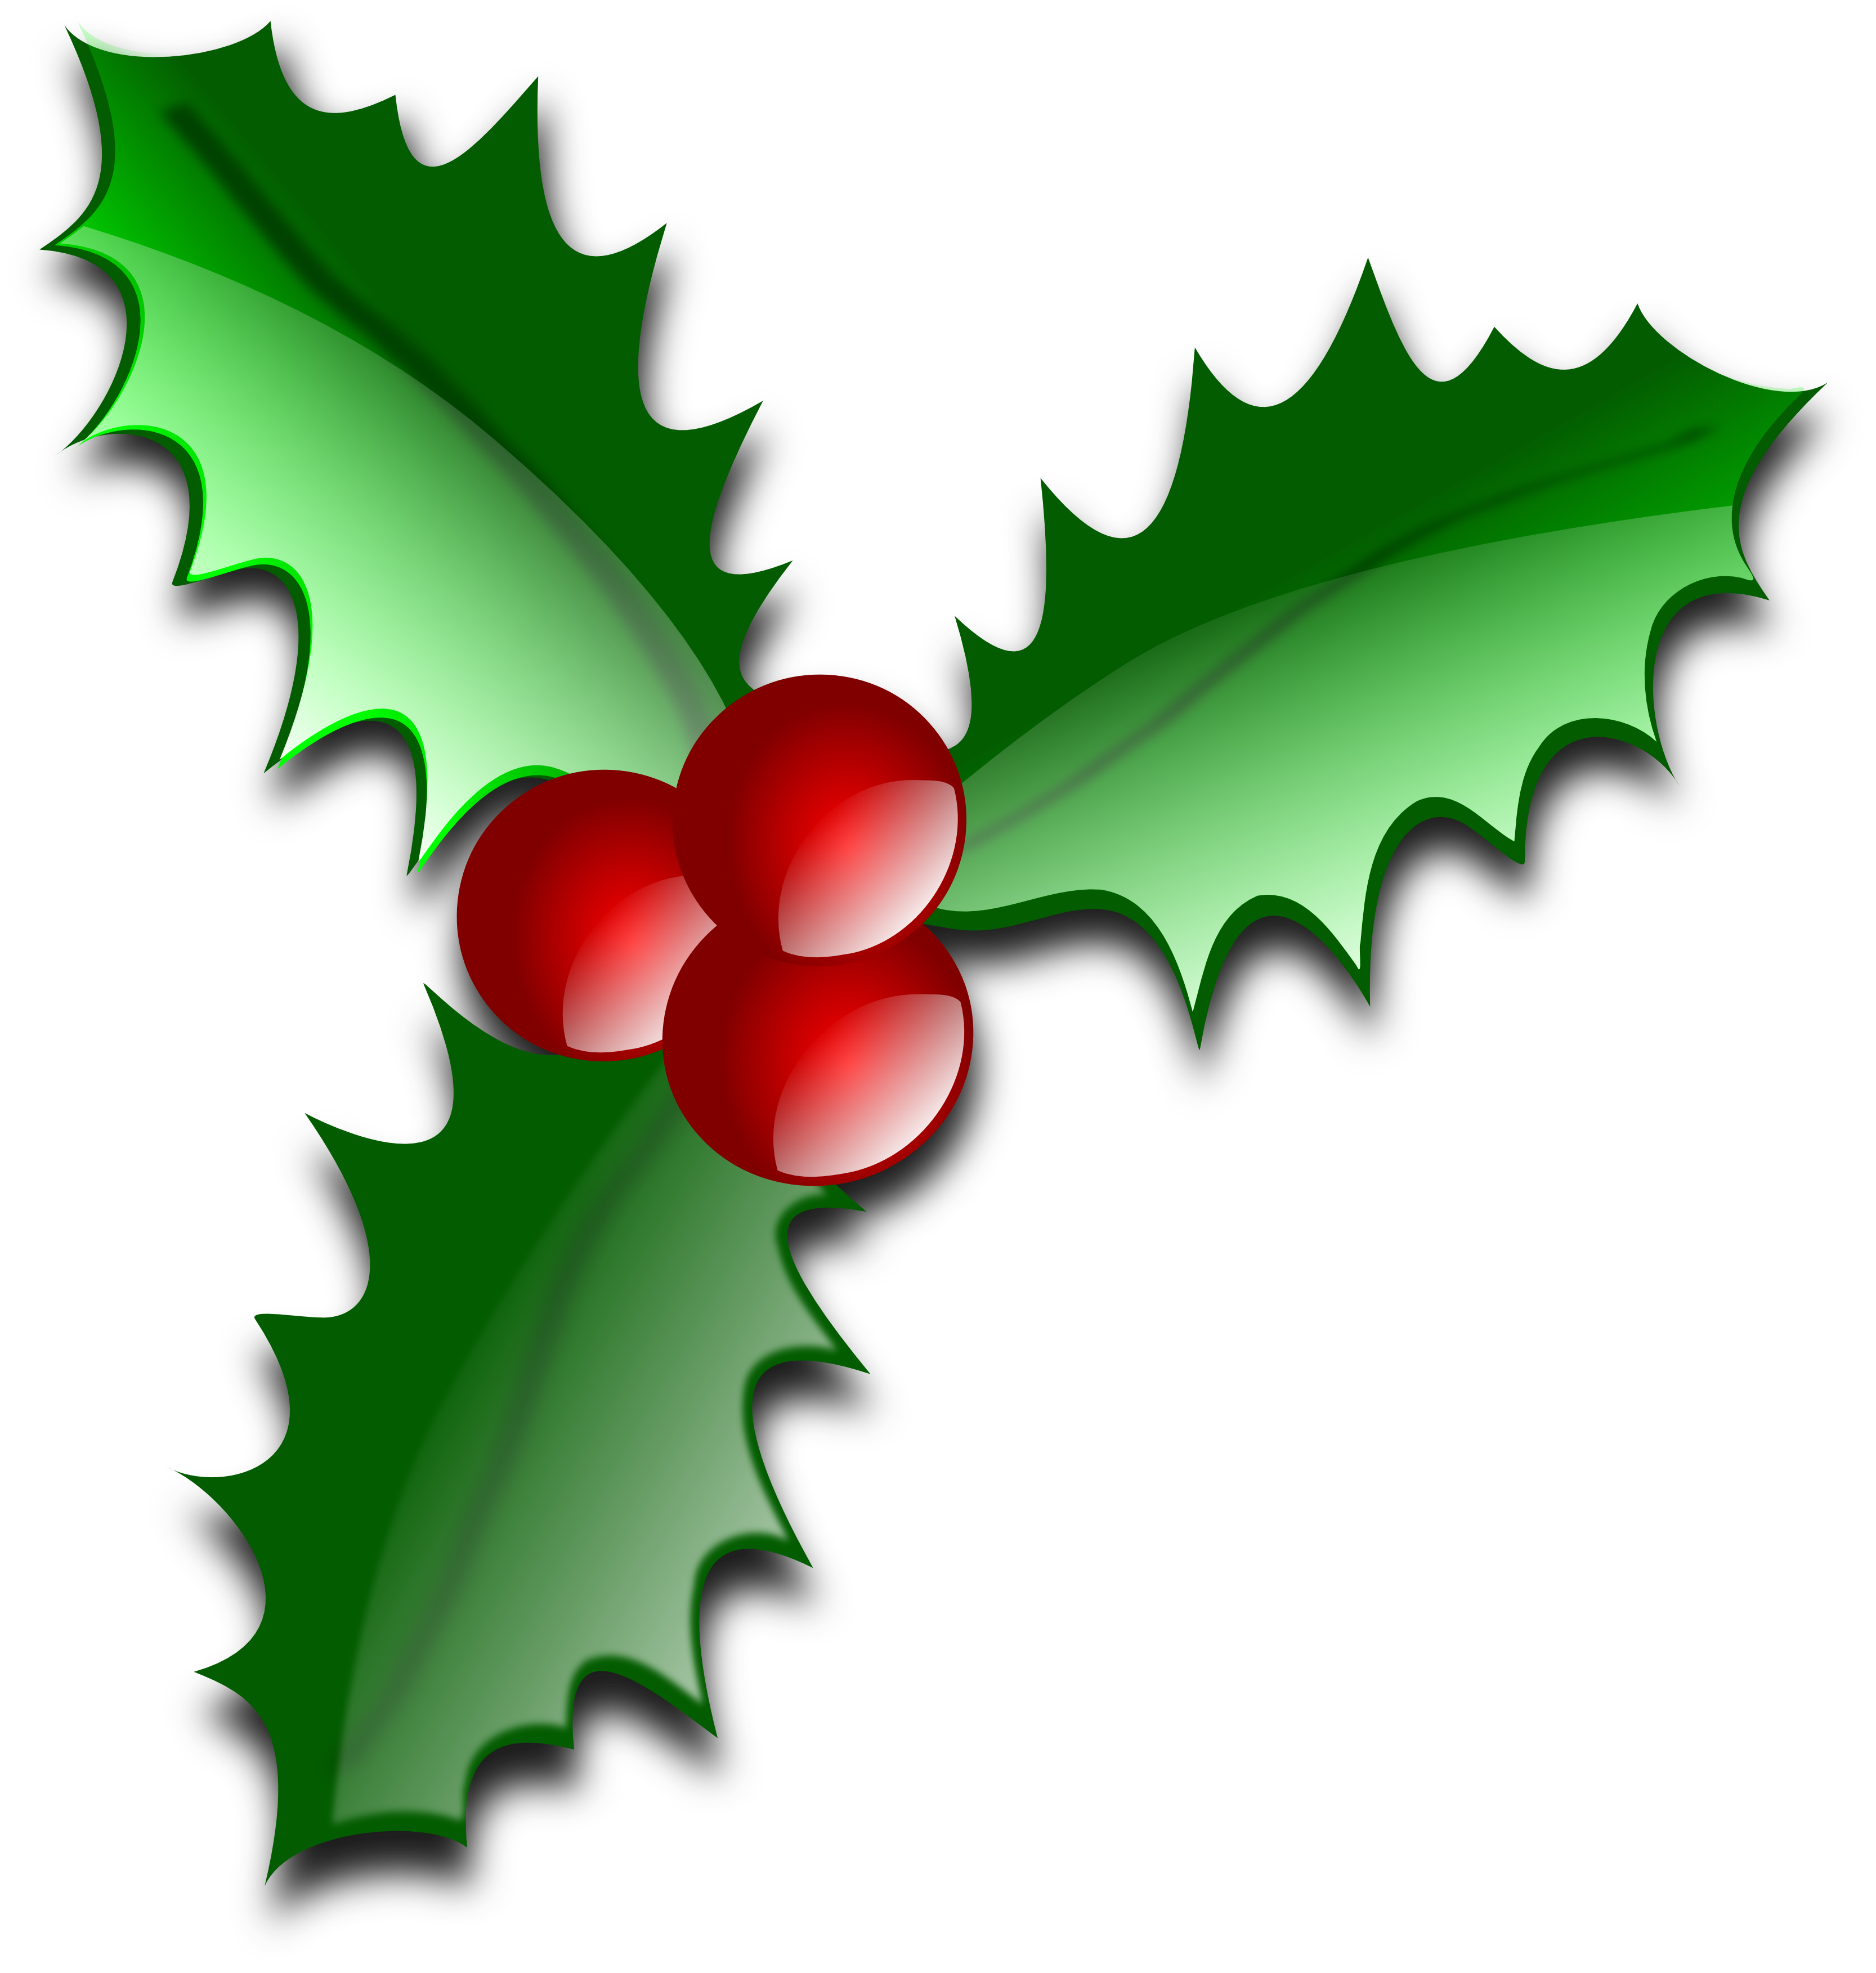 Christmas Holly Clip Art Borders | Clipart Panda - Free Clipart Images